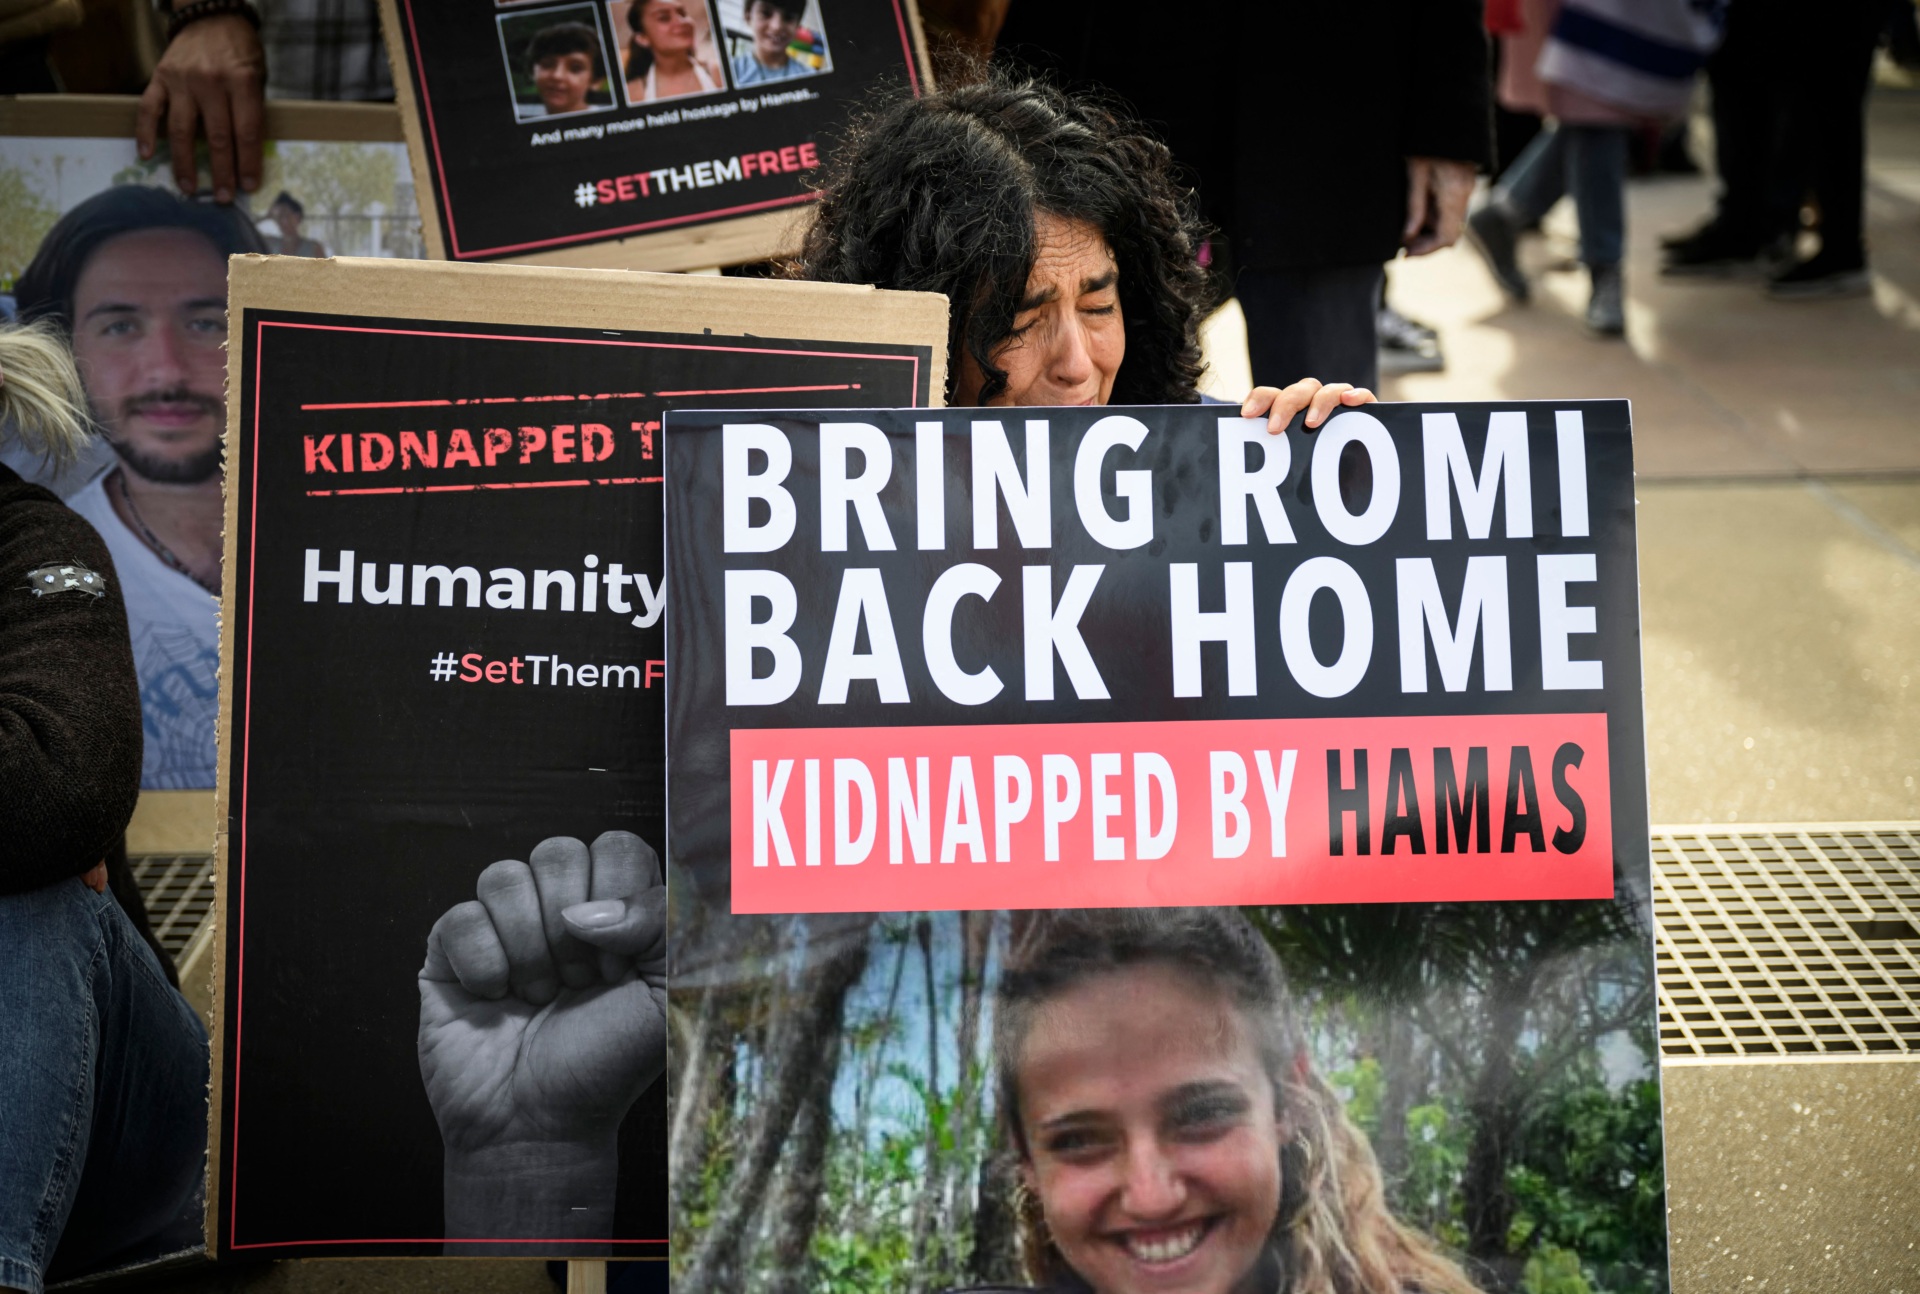 Supporters of Israel, members of the Jewish community and hostages' families and friend attend a rally calling for the release of hostages held by Hamas, near the United Nations office in Geneva, on October 22, 2023. Hamas militants in the Gaza Strip stormed Israel on October 7, taking more than 200 hostages and killing at least 1,400 people, according to Israeli officials. (Photo by Gabriel MONNET / AFP) (Photo by GABRIEL MONNET/AFP via Getty Images)